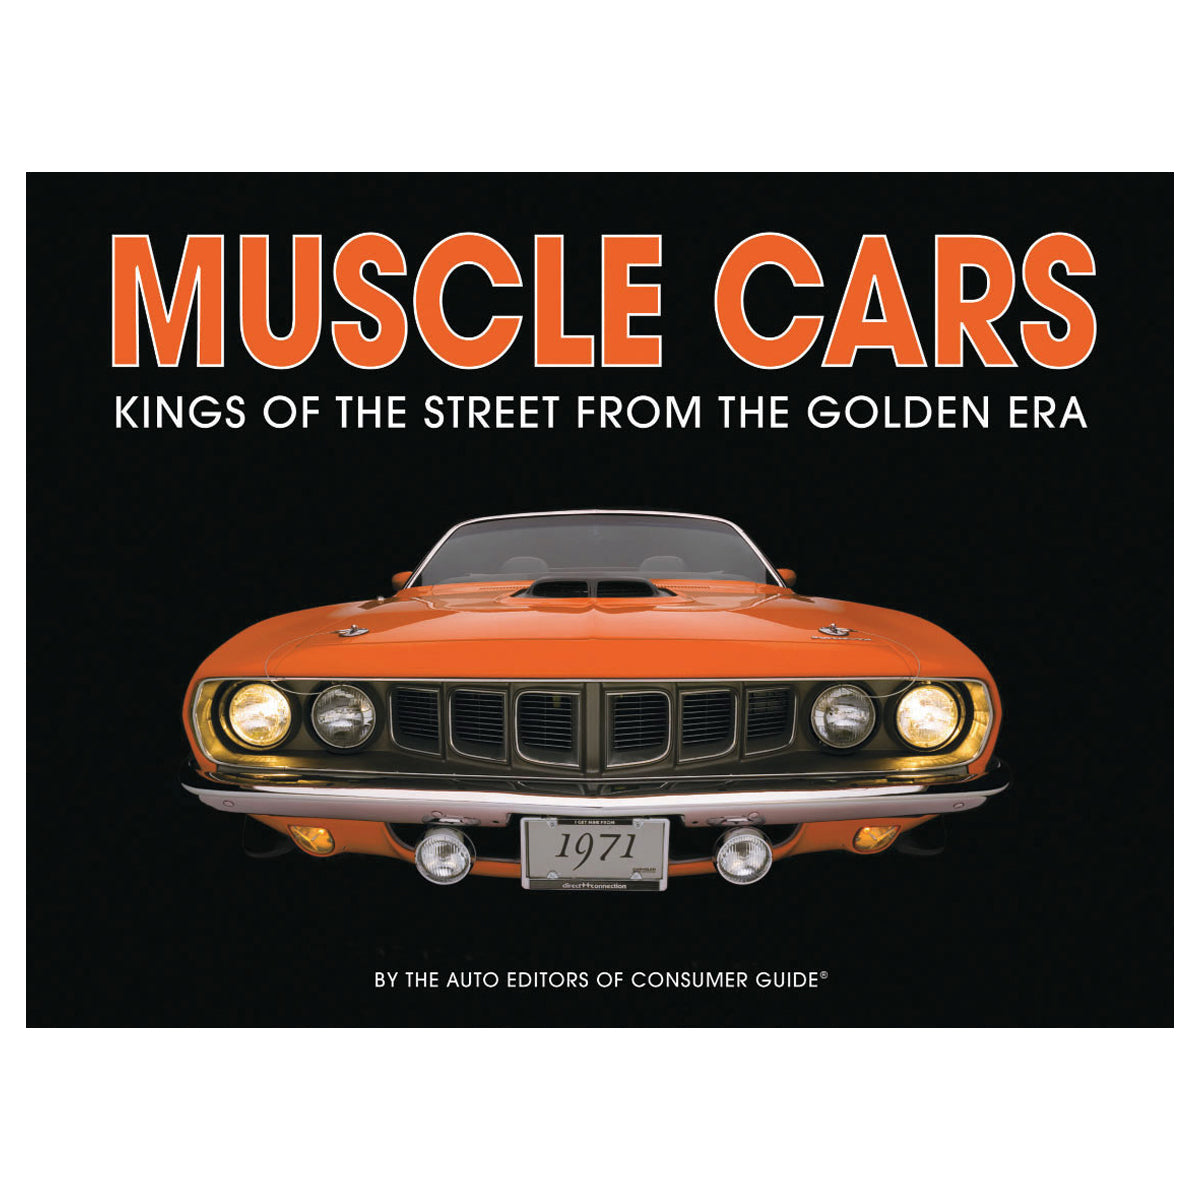 Muscle Cars Kings of the Street From the Golden Era